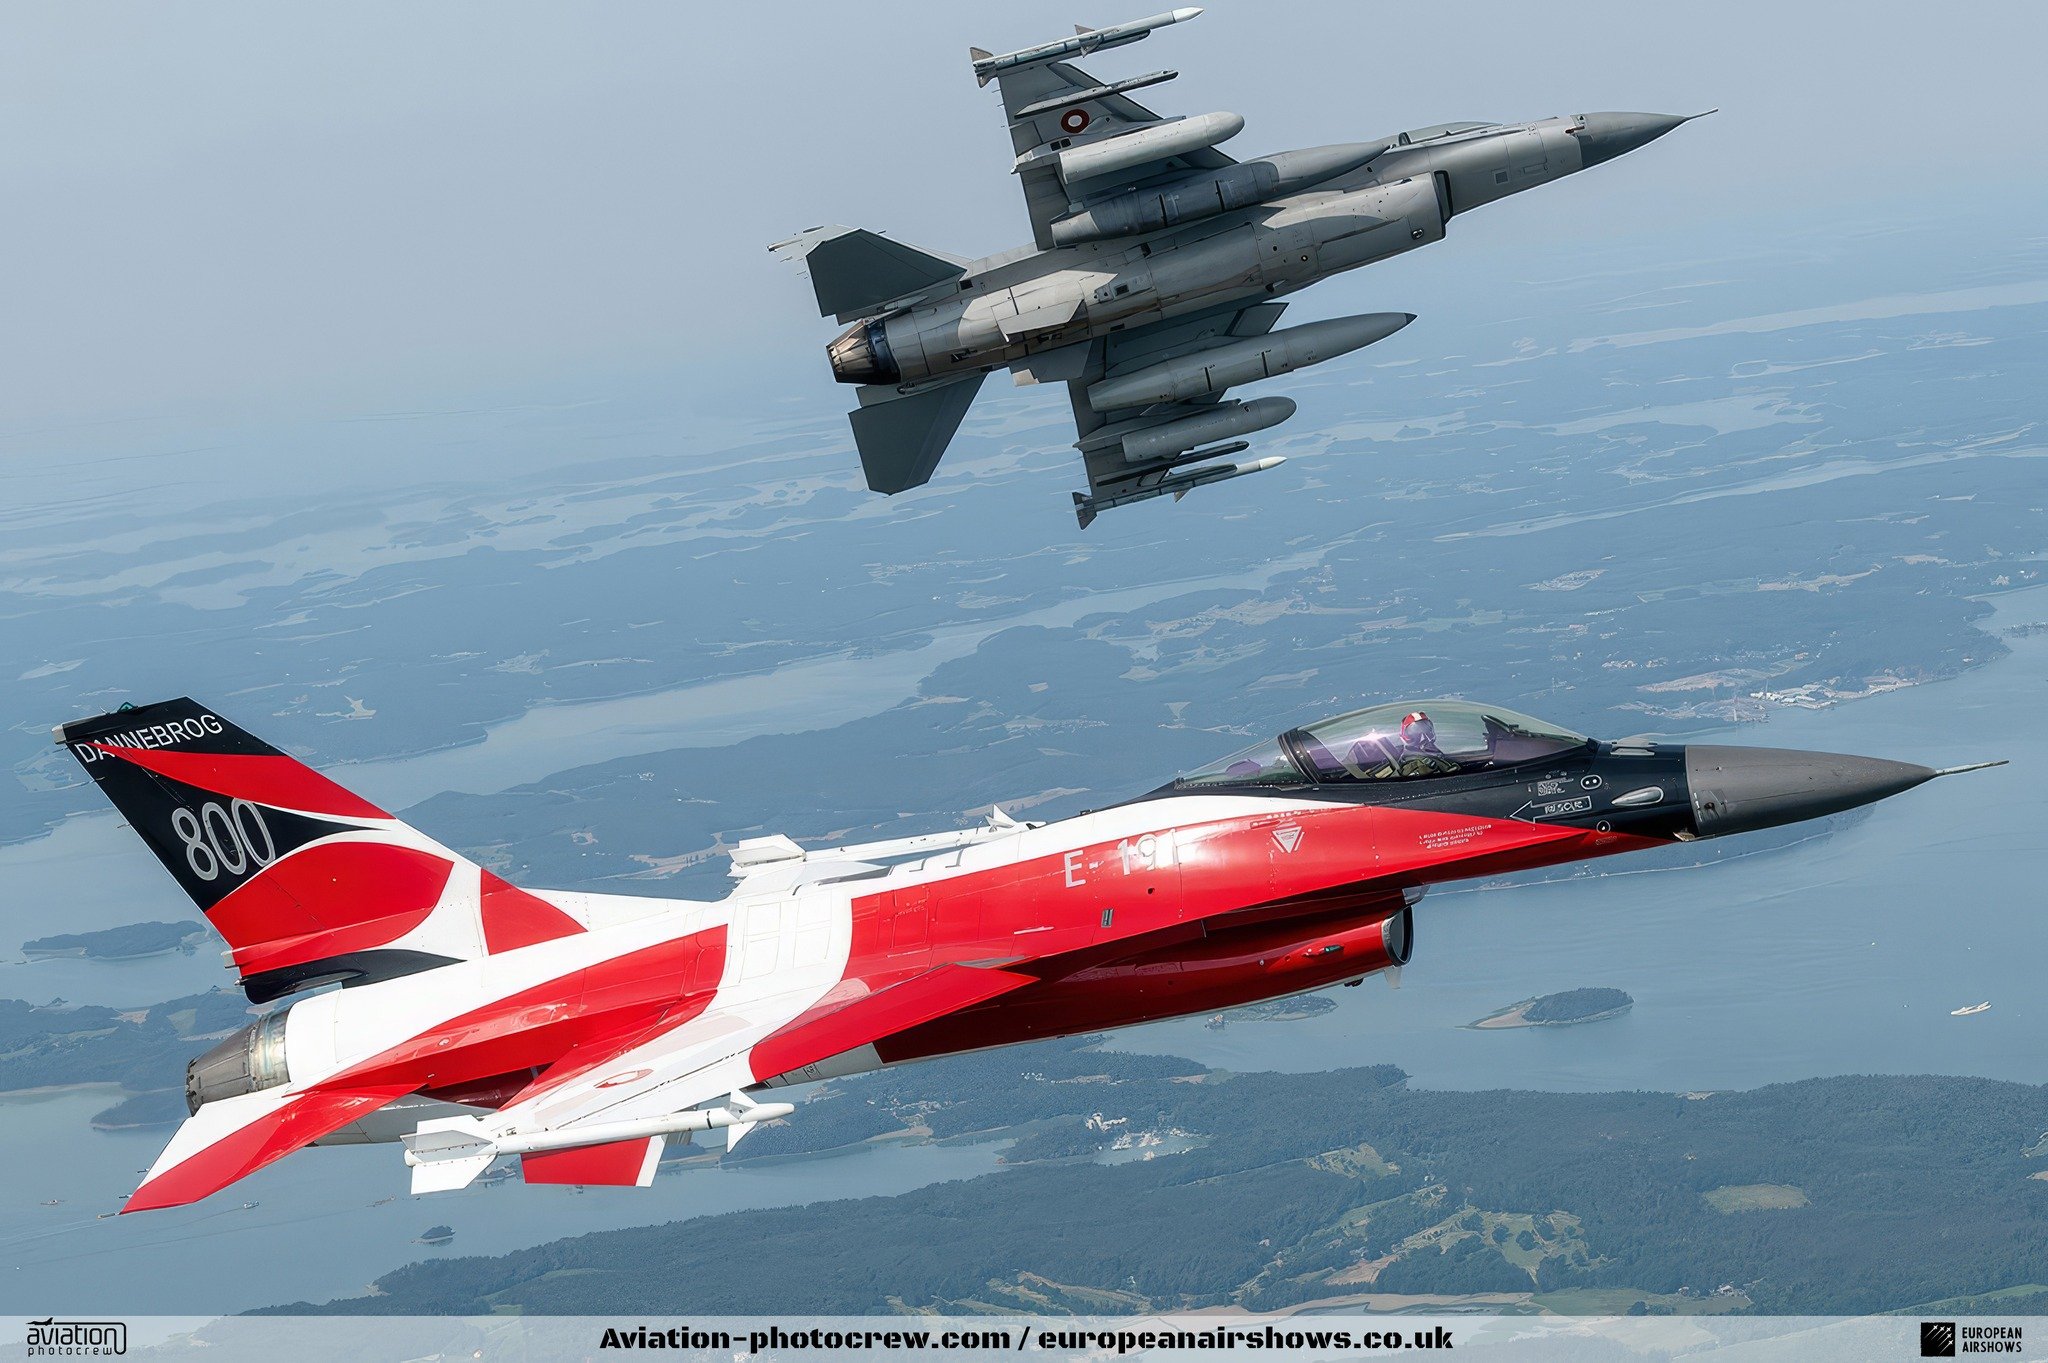 𝐀𝐈𝐑𝐒𝐇𝐎𝐖 𝐍𝐄𝐖𝐒: The Danish Air Force has recently announced that it will postpone its major airshow, which was initially planned to take place on Sunday, June 9th, 2024, in Aalborg, until 2025.

Read more on our website by clicking the link 